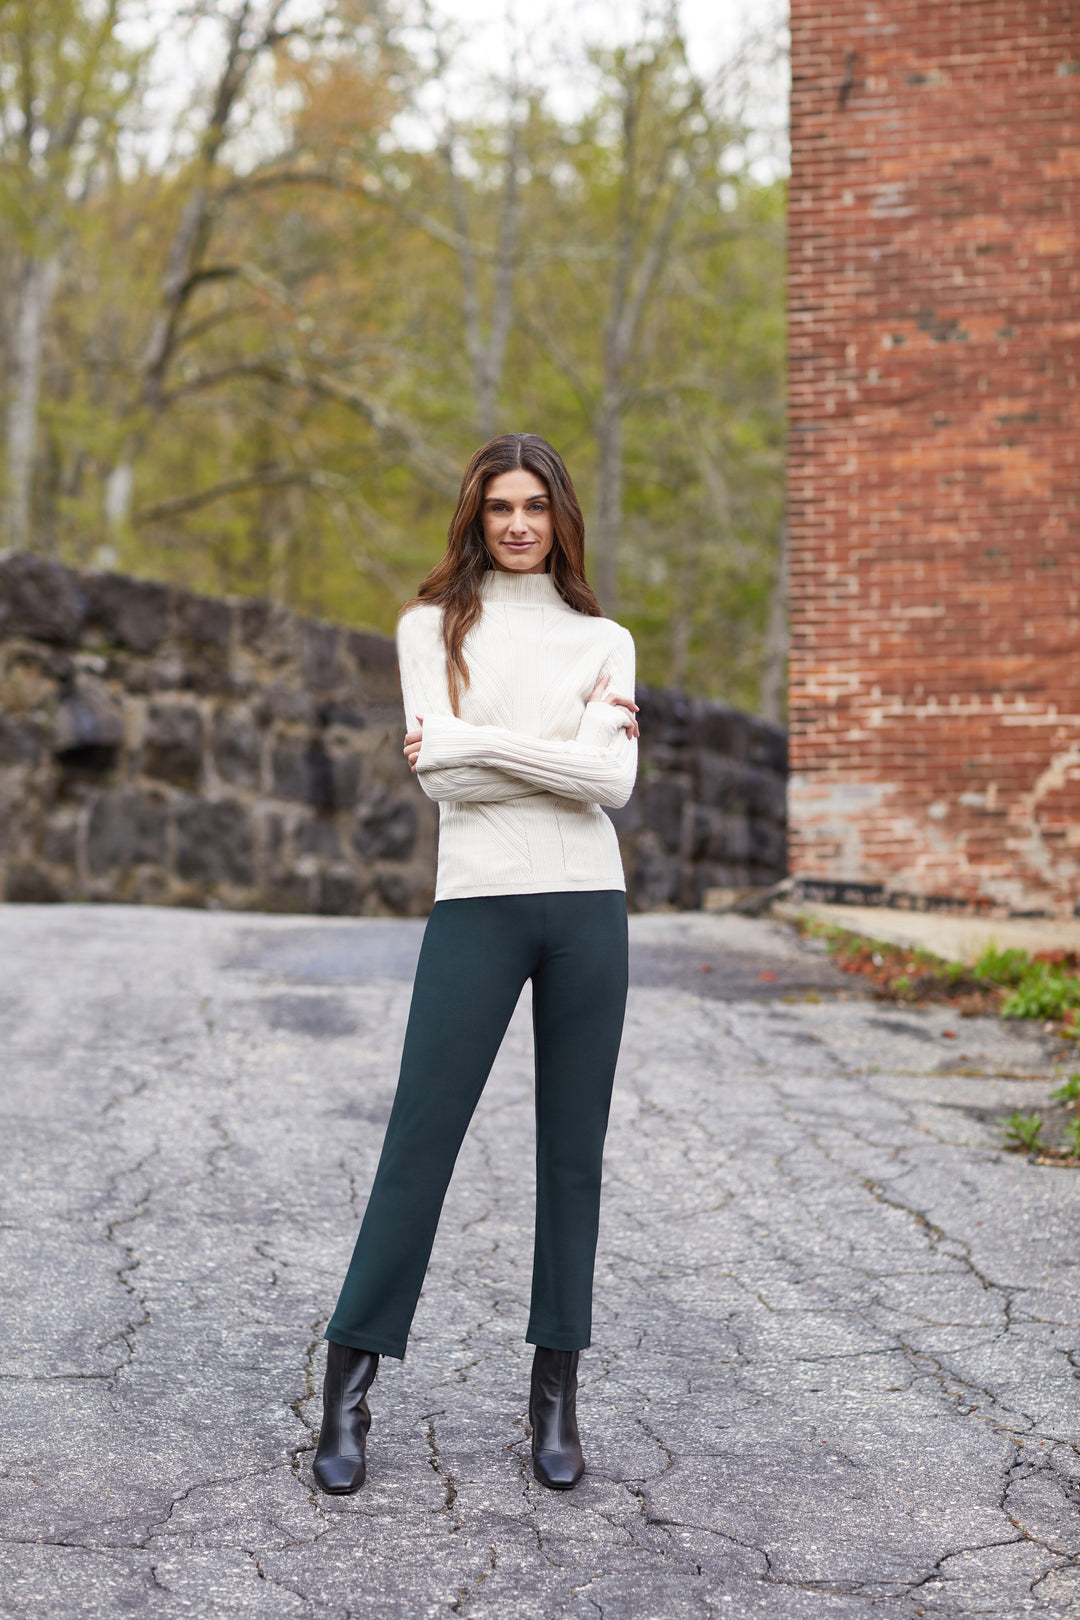 Prince Cropped Flare Pant - Forest